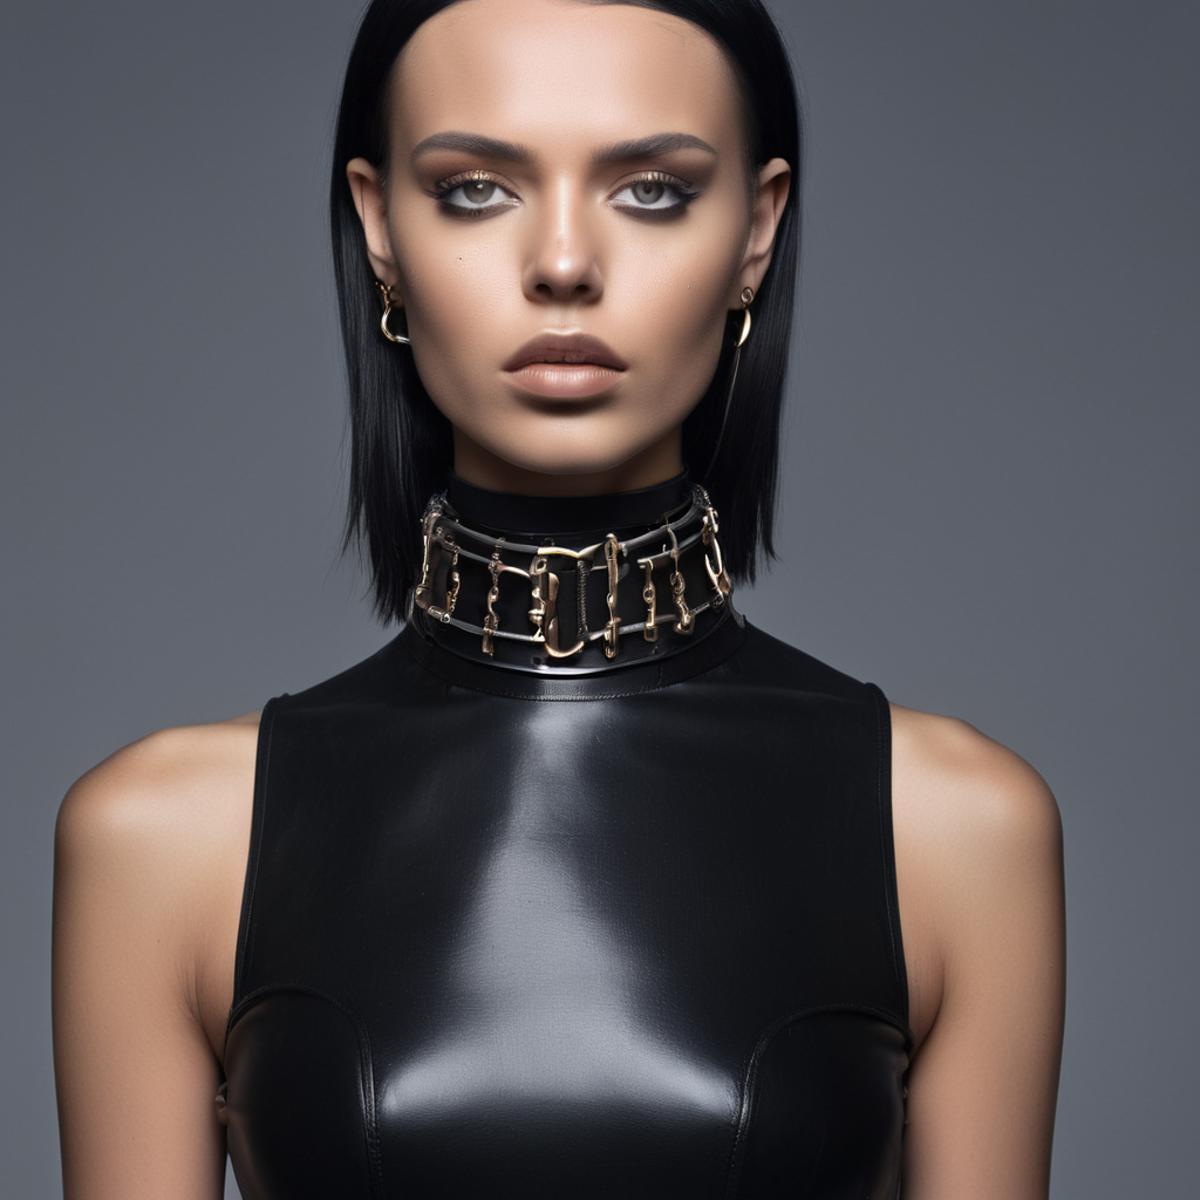 a woman in a black leather dress with a choker, wearing steel collar, slave collar, choker, wearing detailed leather colla...